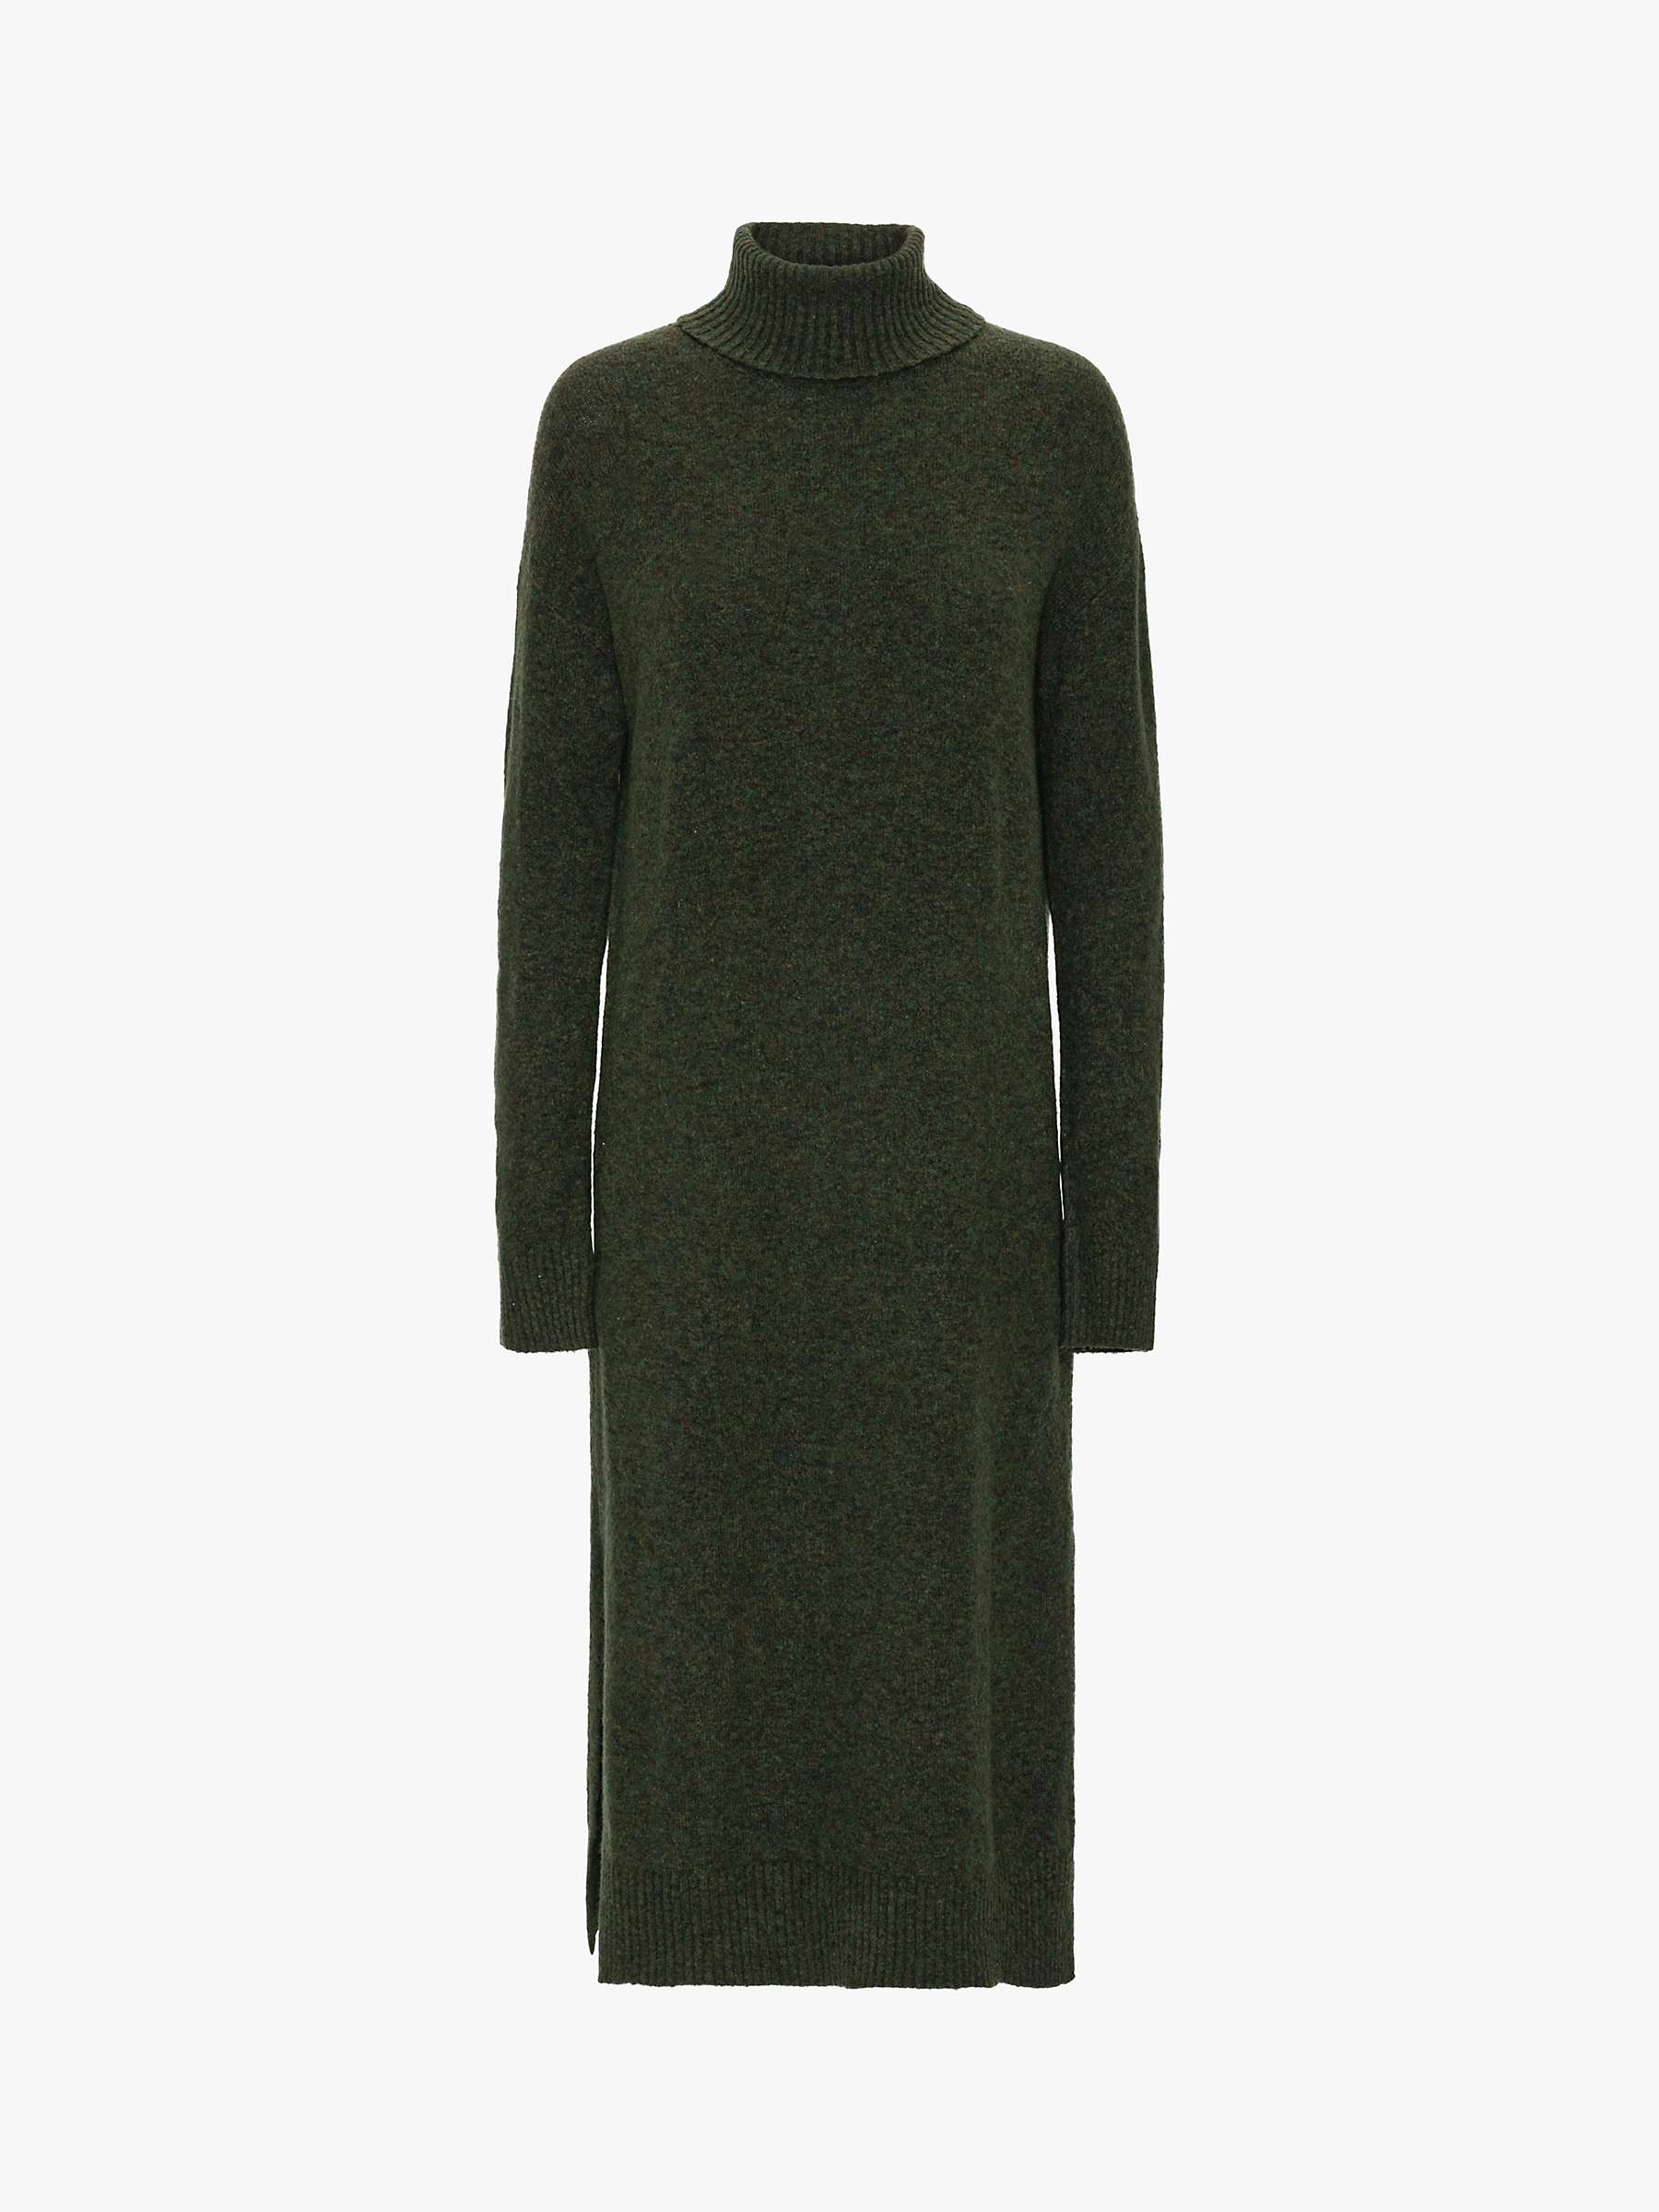 A-VIEW Penny Knit Wool Blend Jumper Dress, Army at John Lewis & Partners